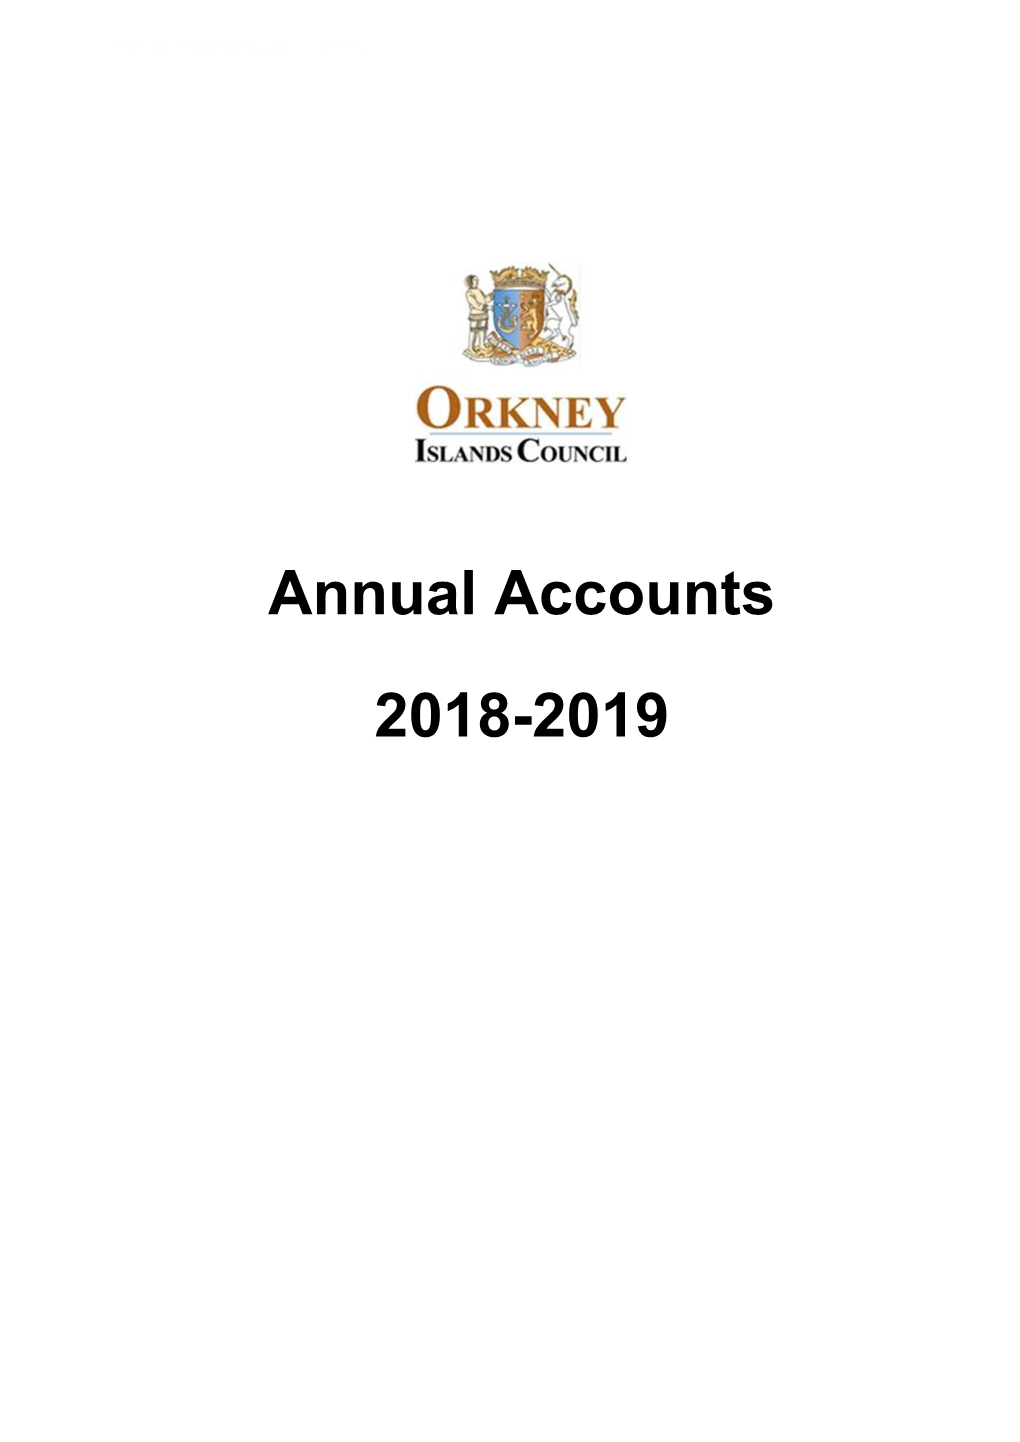 Orkney Islands Council Annual Accounts 2018-2019